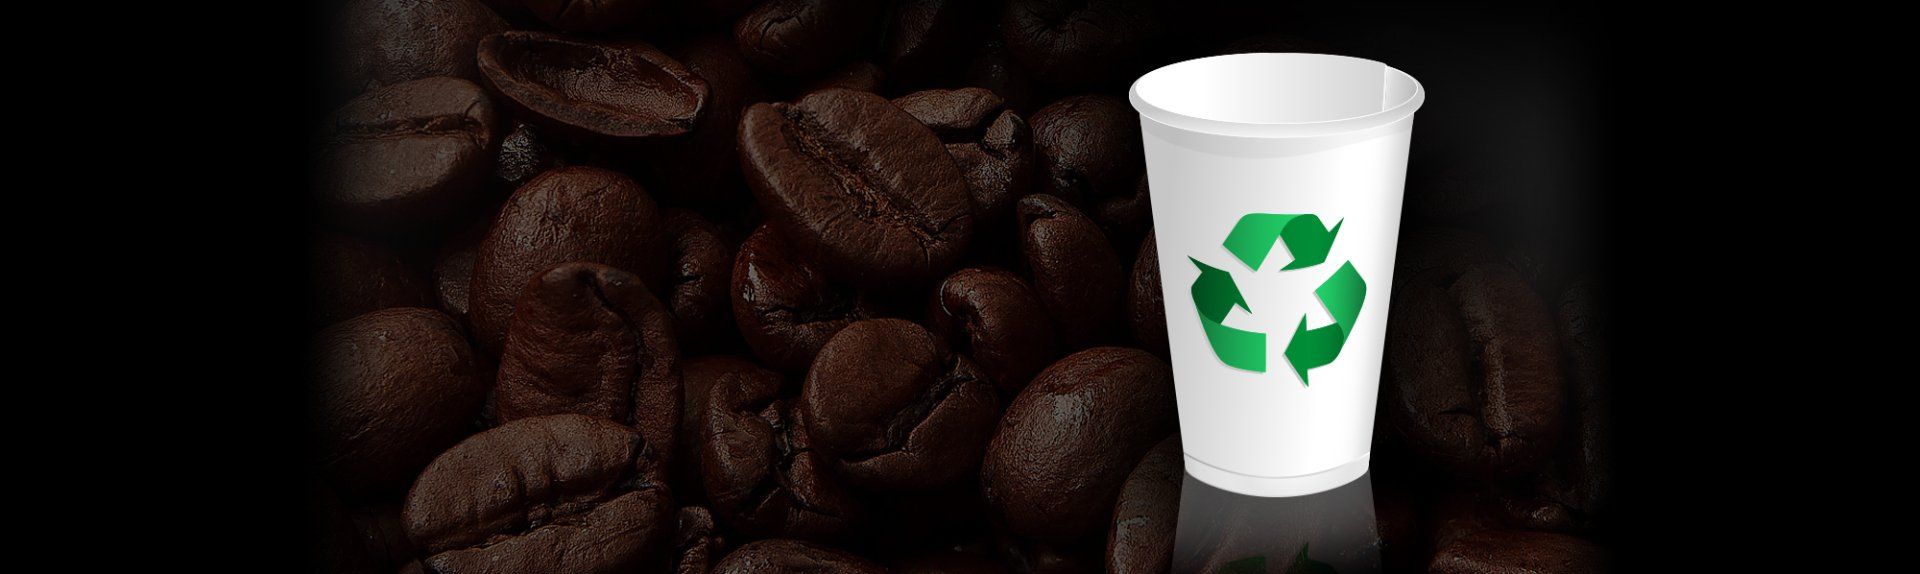 Recyclable Cups | Murray, UT | Serv-A-Cup Office Coffee